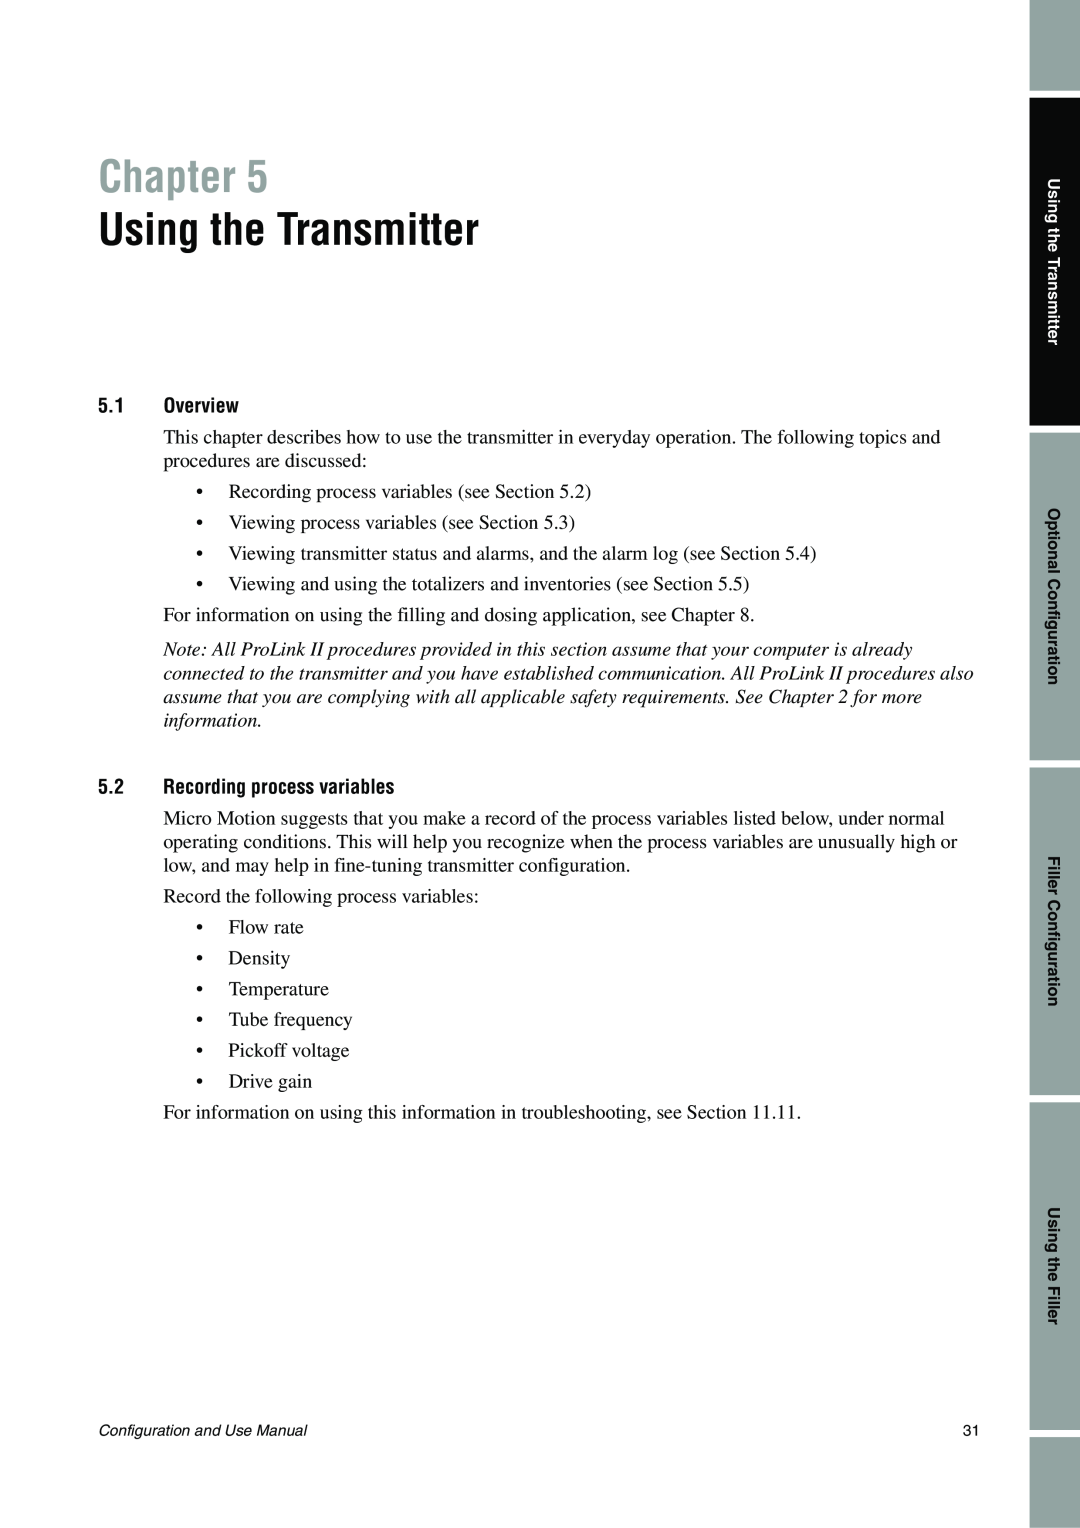 Emerson Process Management 1500 manual Using the Transmitter, Chapter, 5.1Overview, 5.2Recording process variables 